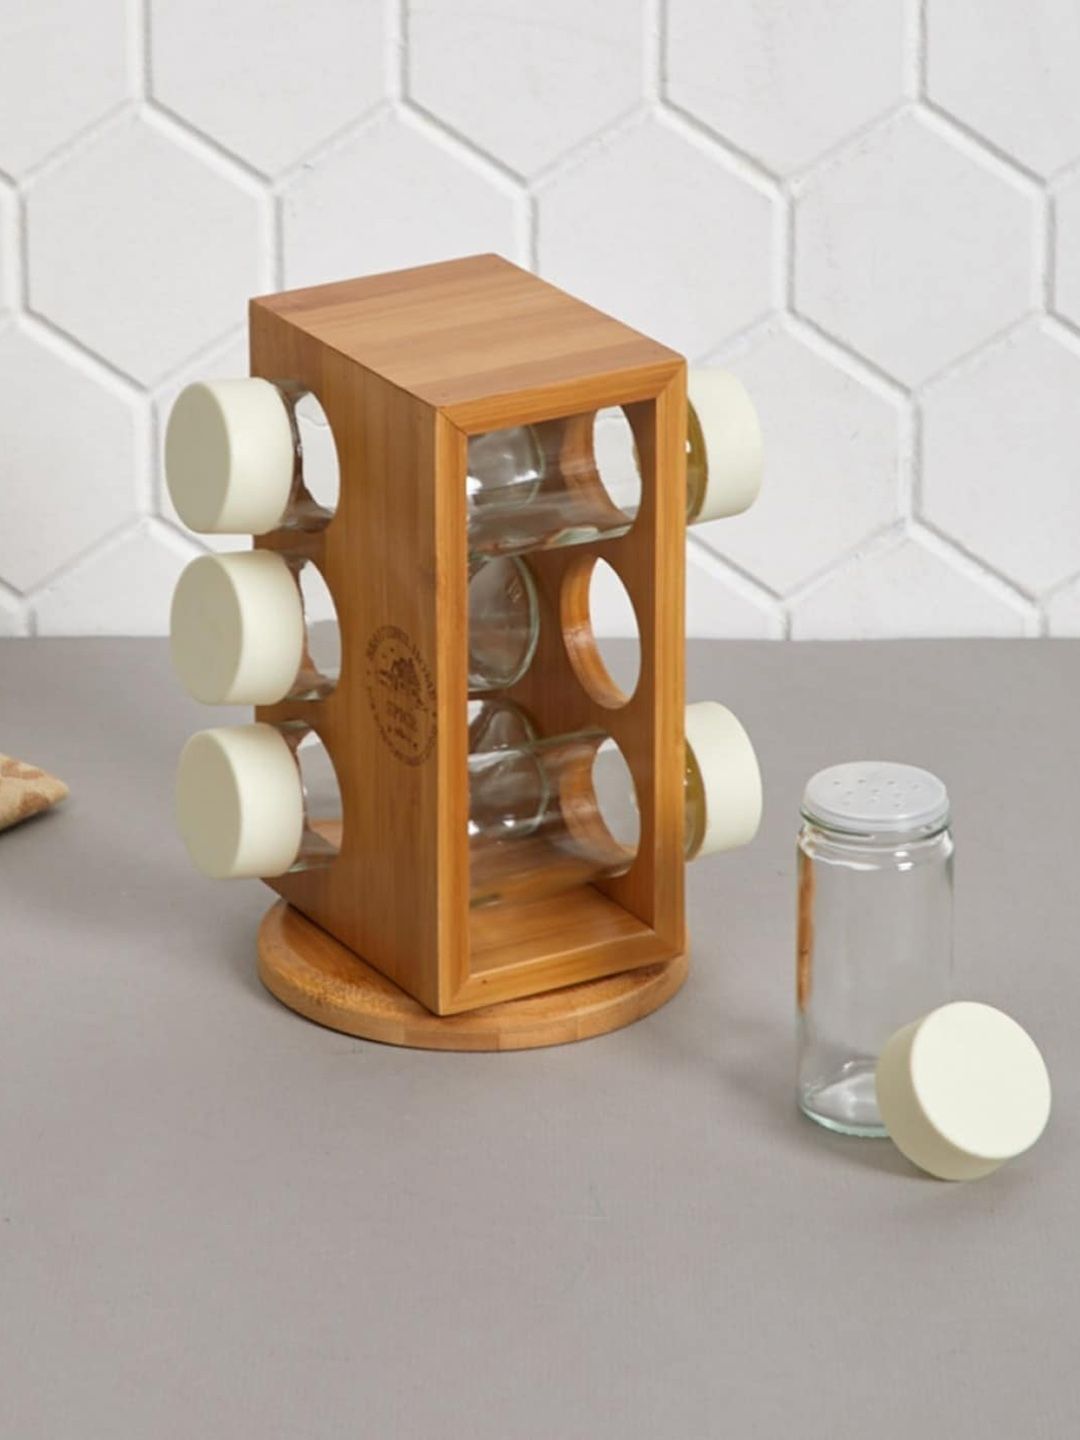 Home Centre Set Of 6 Transparent & Brown Air-Tight Spice Rack Set With Bamboo Stand Price in India